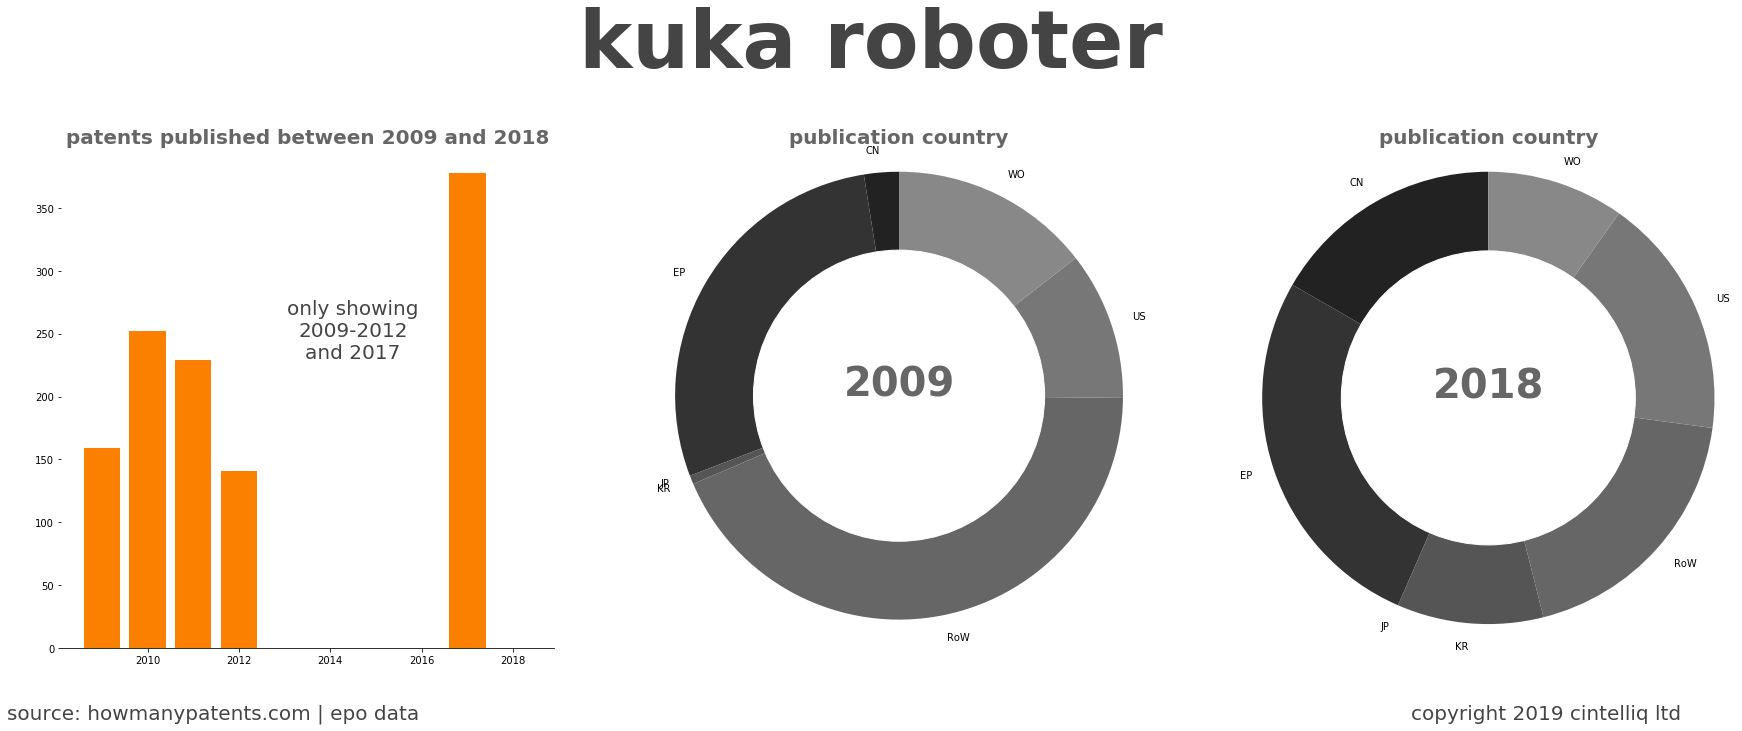 summary of patents for Kuka Roboter